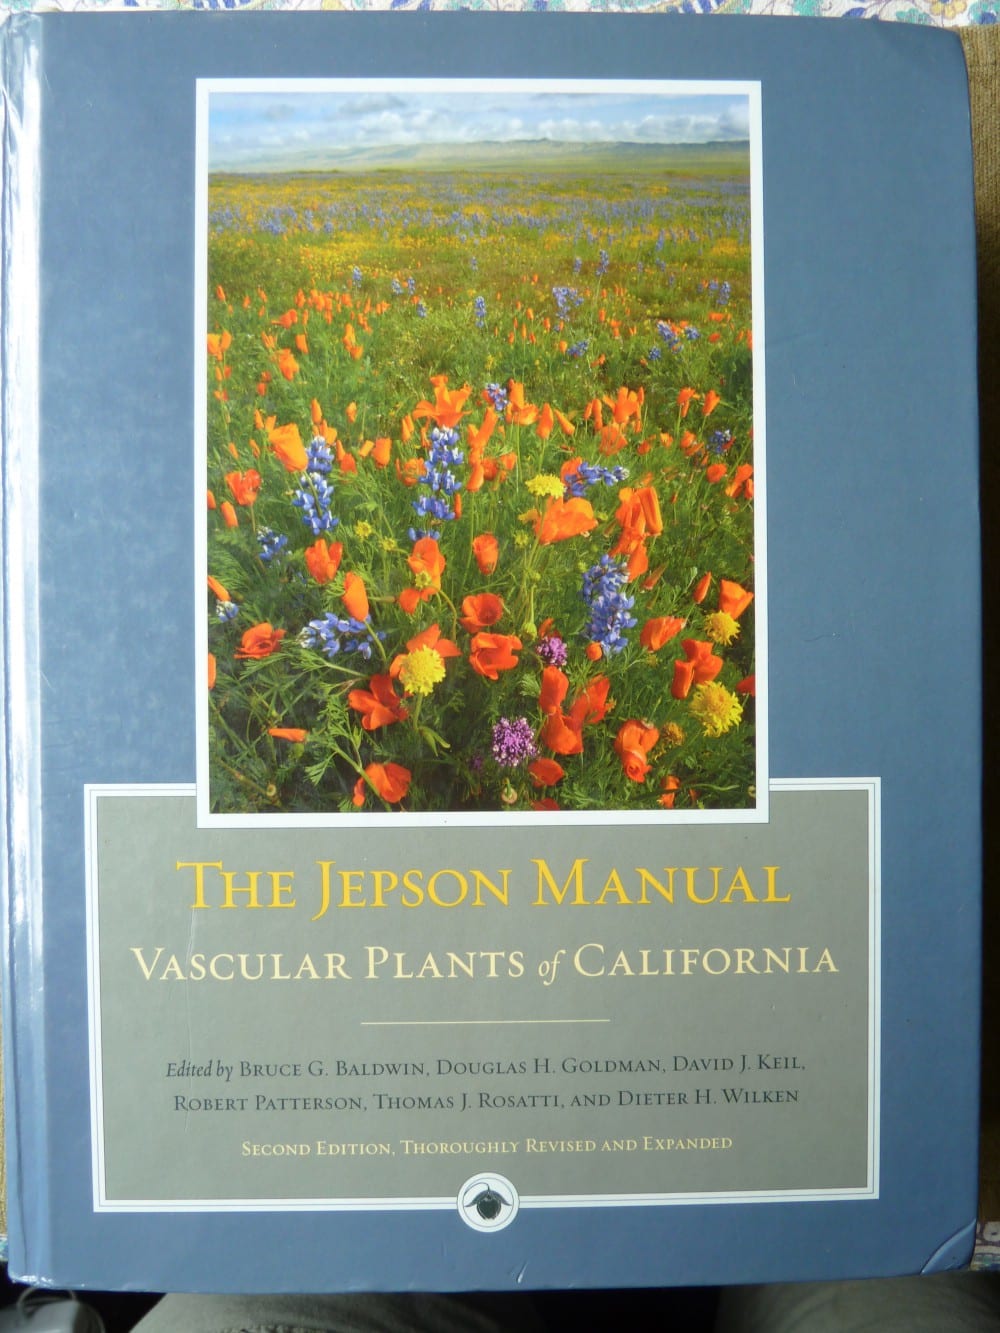 The Jepson Manual: Vascular Plants of California, Second Edition